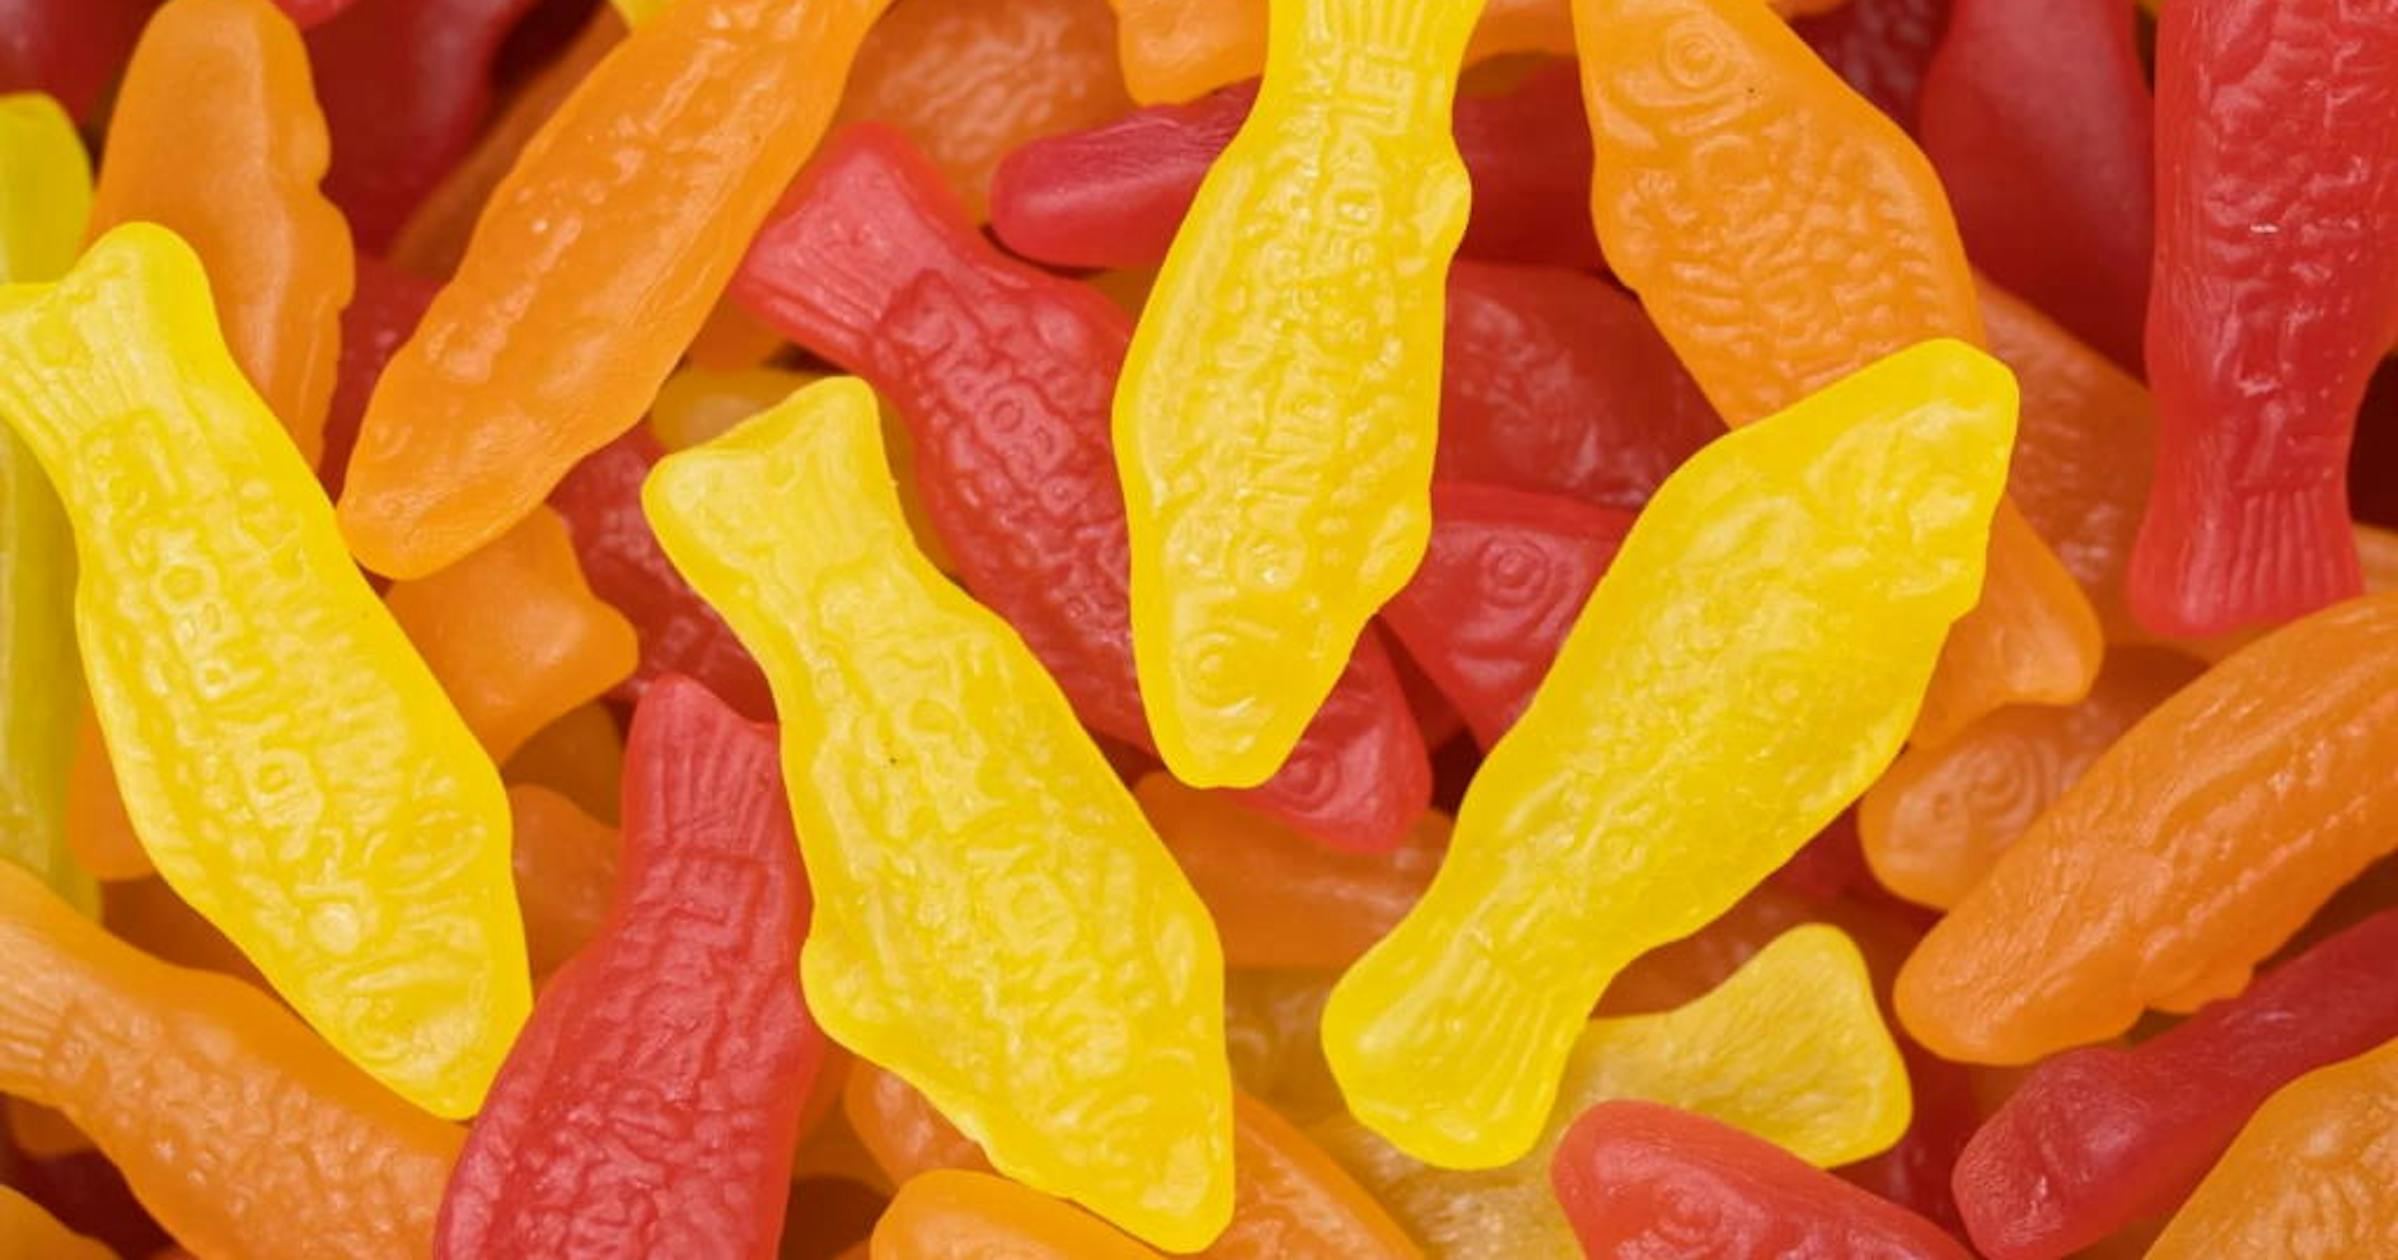 Mr Fancy Candy - Swedish Fish Tails 2 Flavors in 1 Soft & Chewy